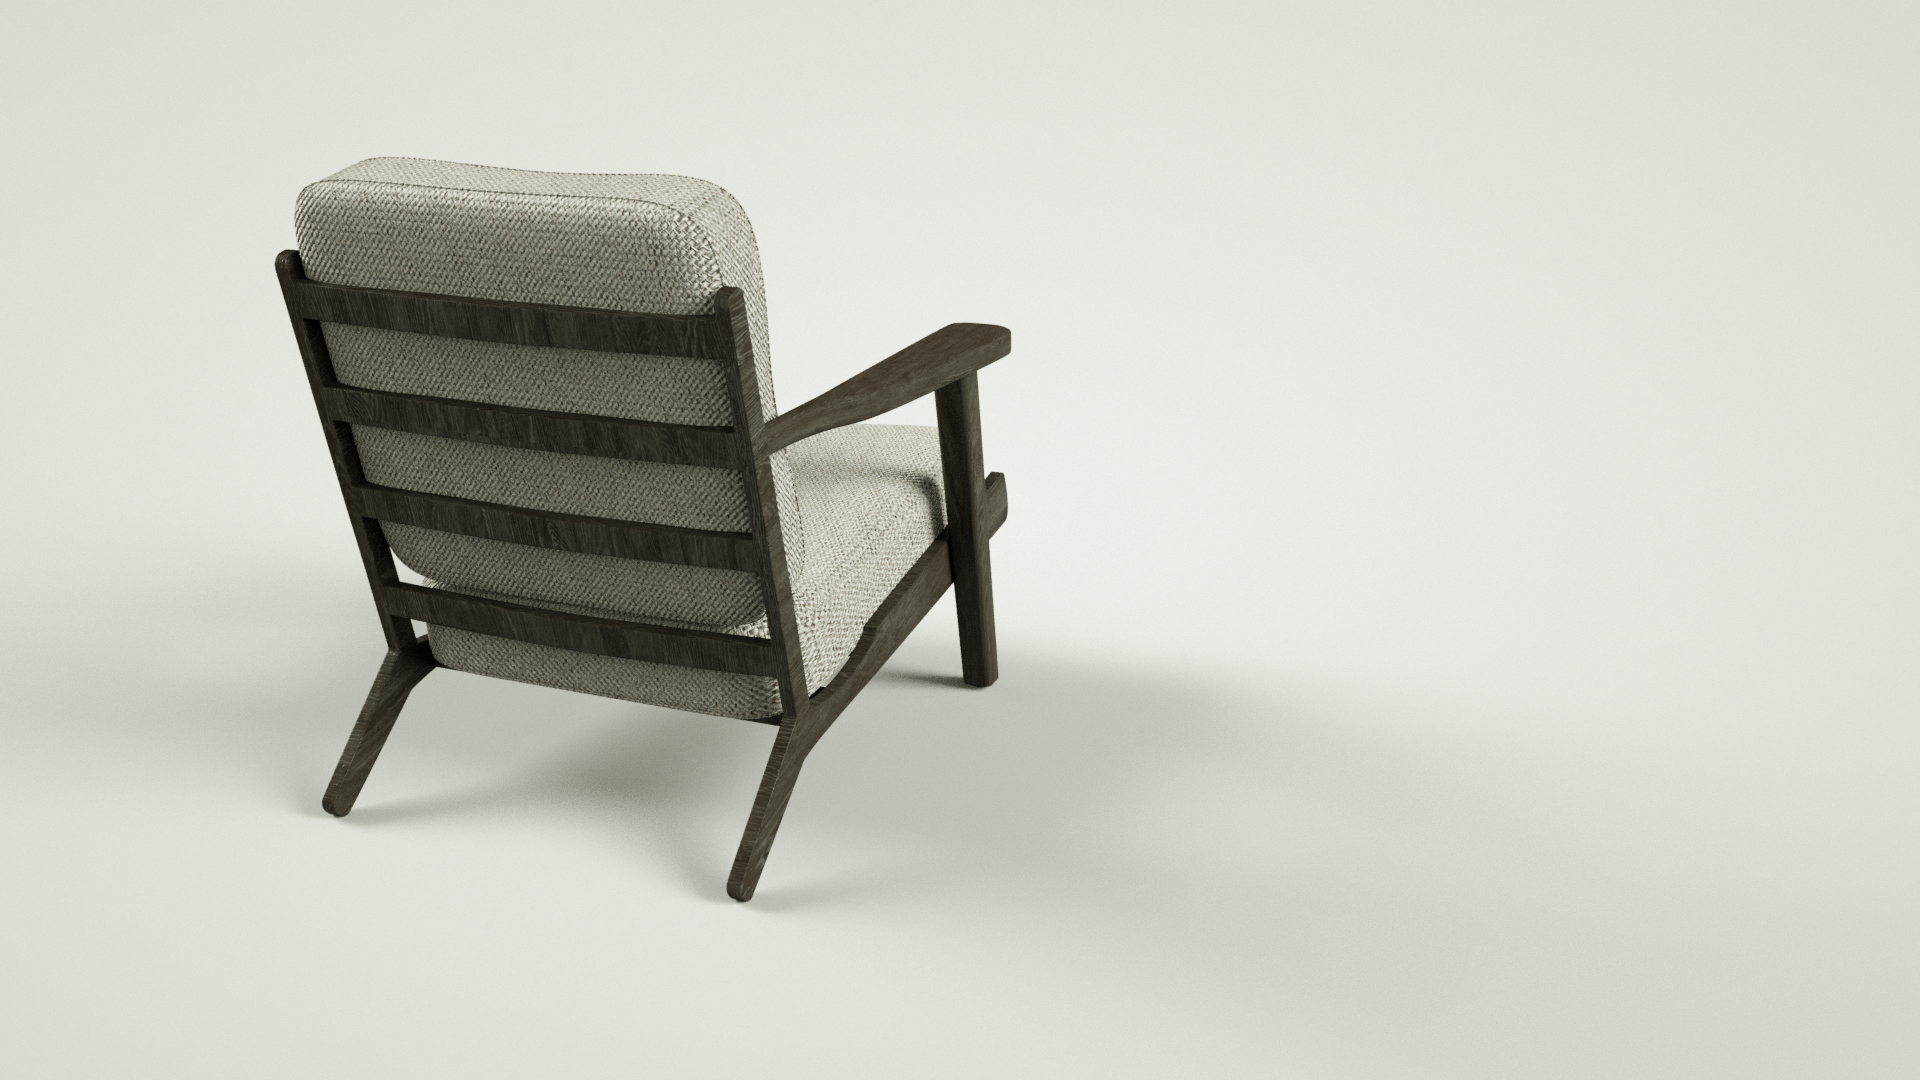 3D rendering of a chair in a forrest